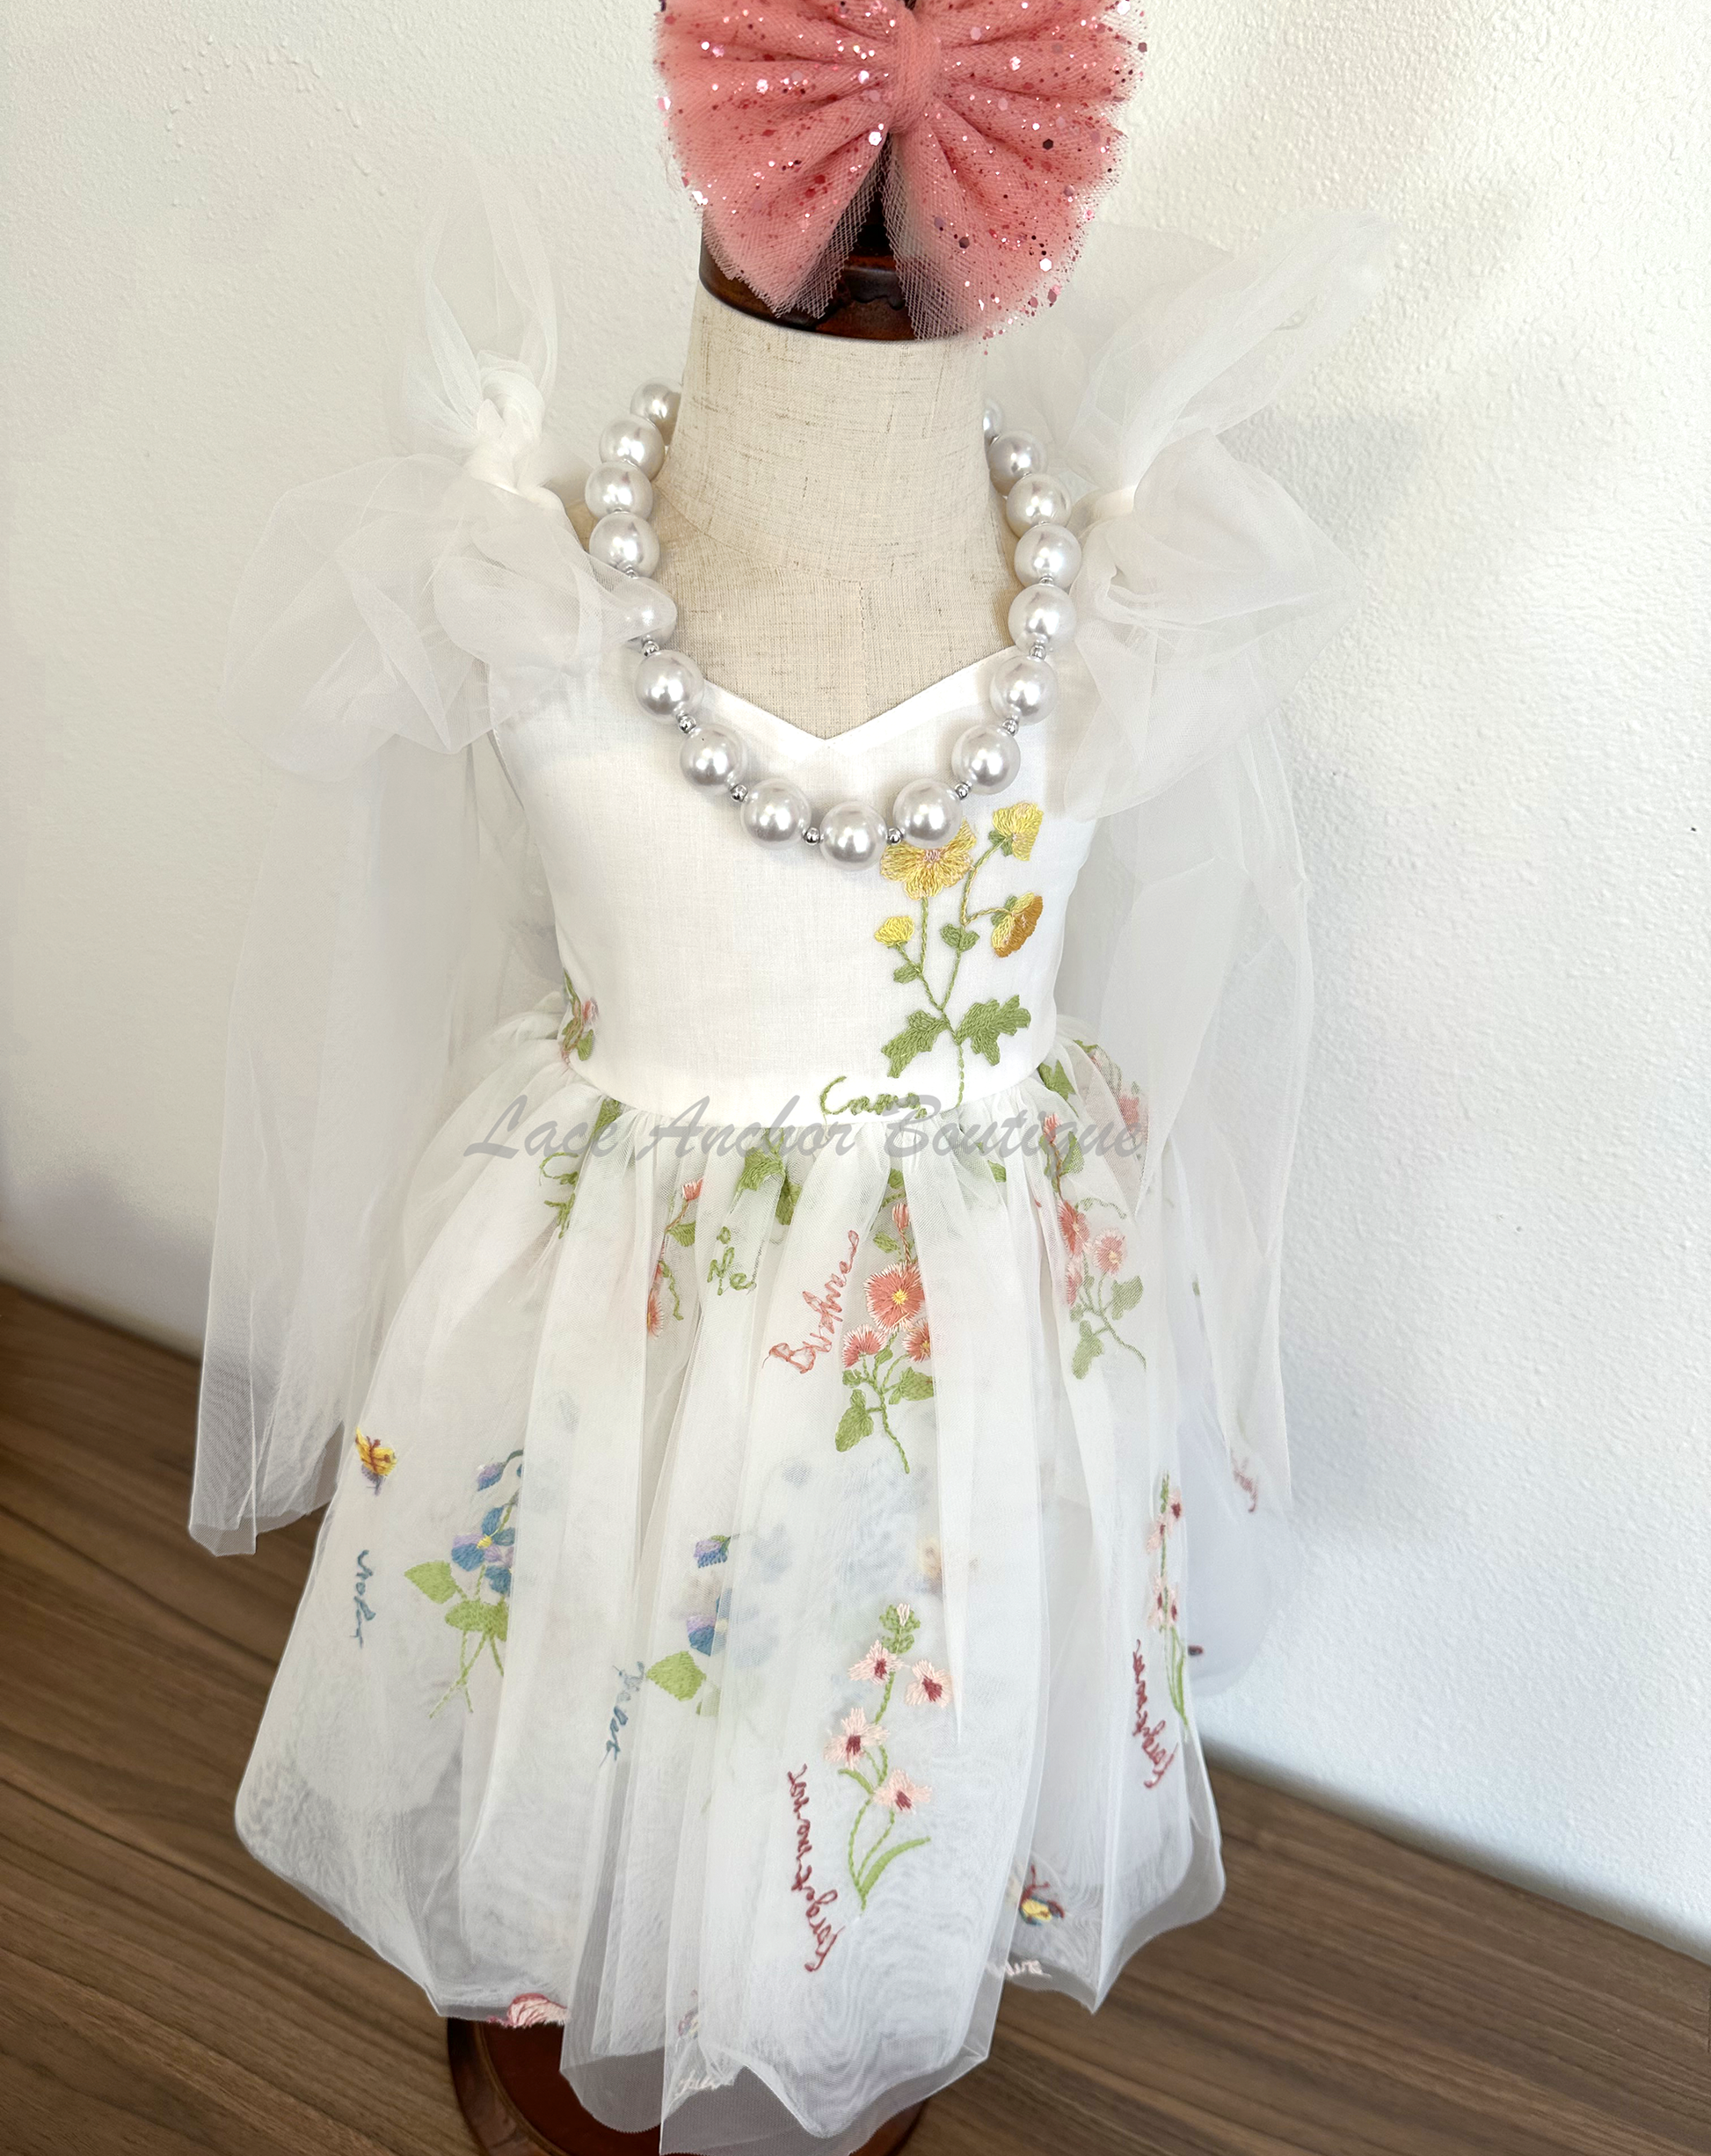 oddler youth puffy tied shoulder flower girl dress with large tied bow tied at waist. Outfits in white with embroidered floral print.